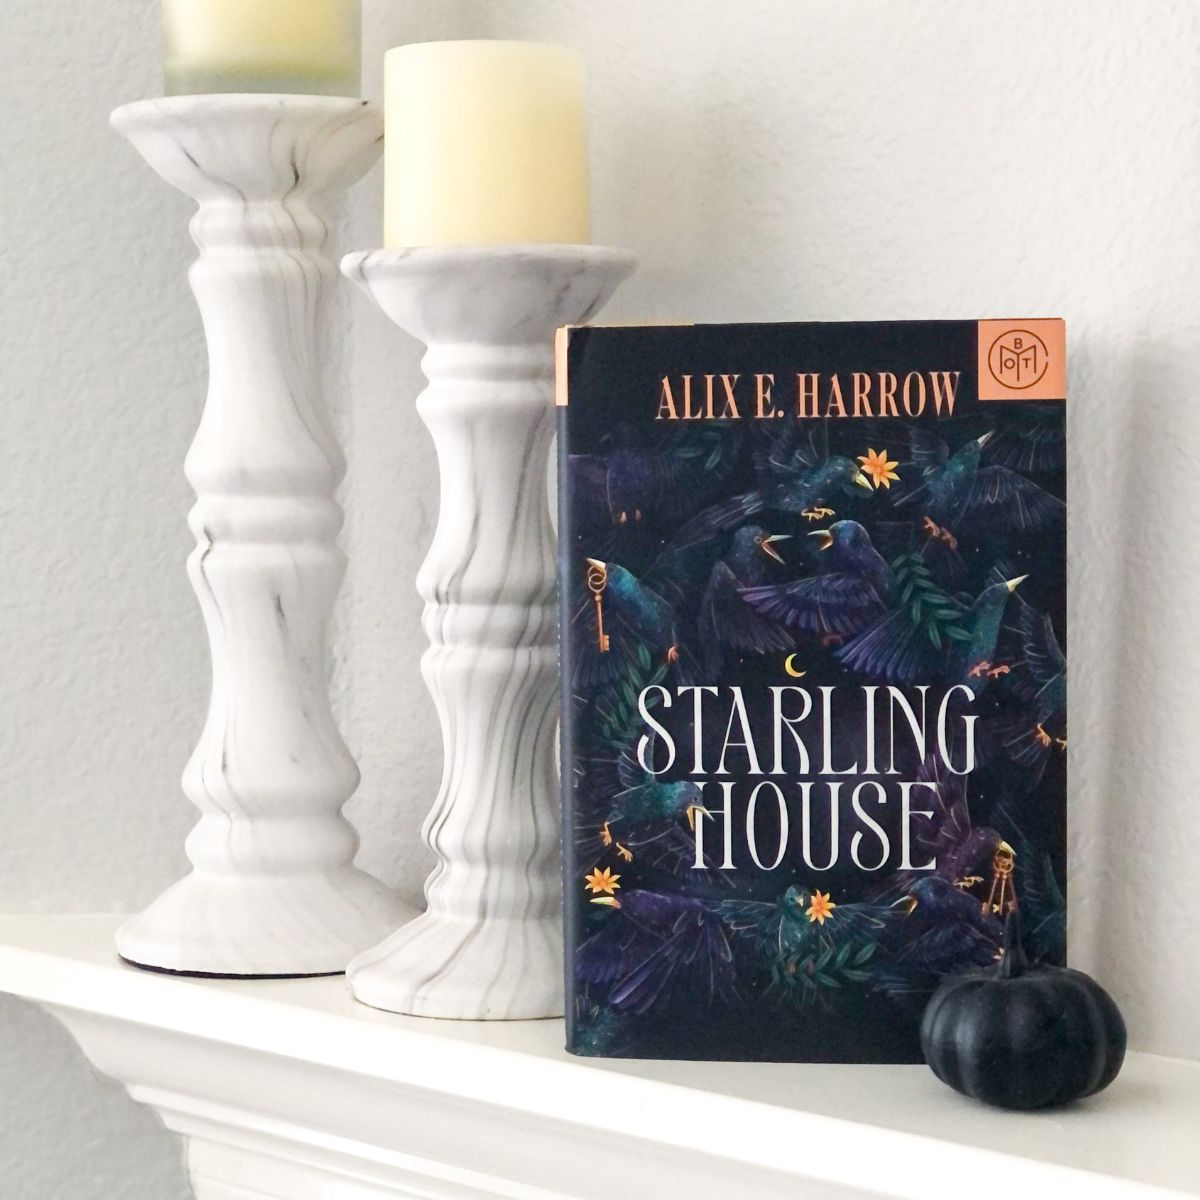 Starling House Gothic fantasy book on a white fireplace mantel with marble candlesticks